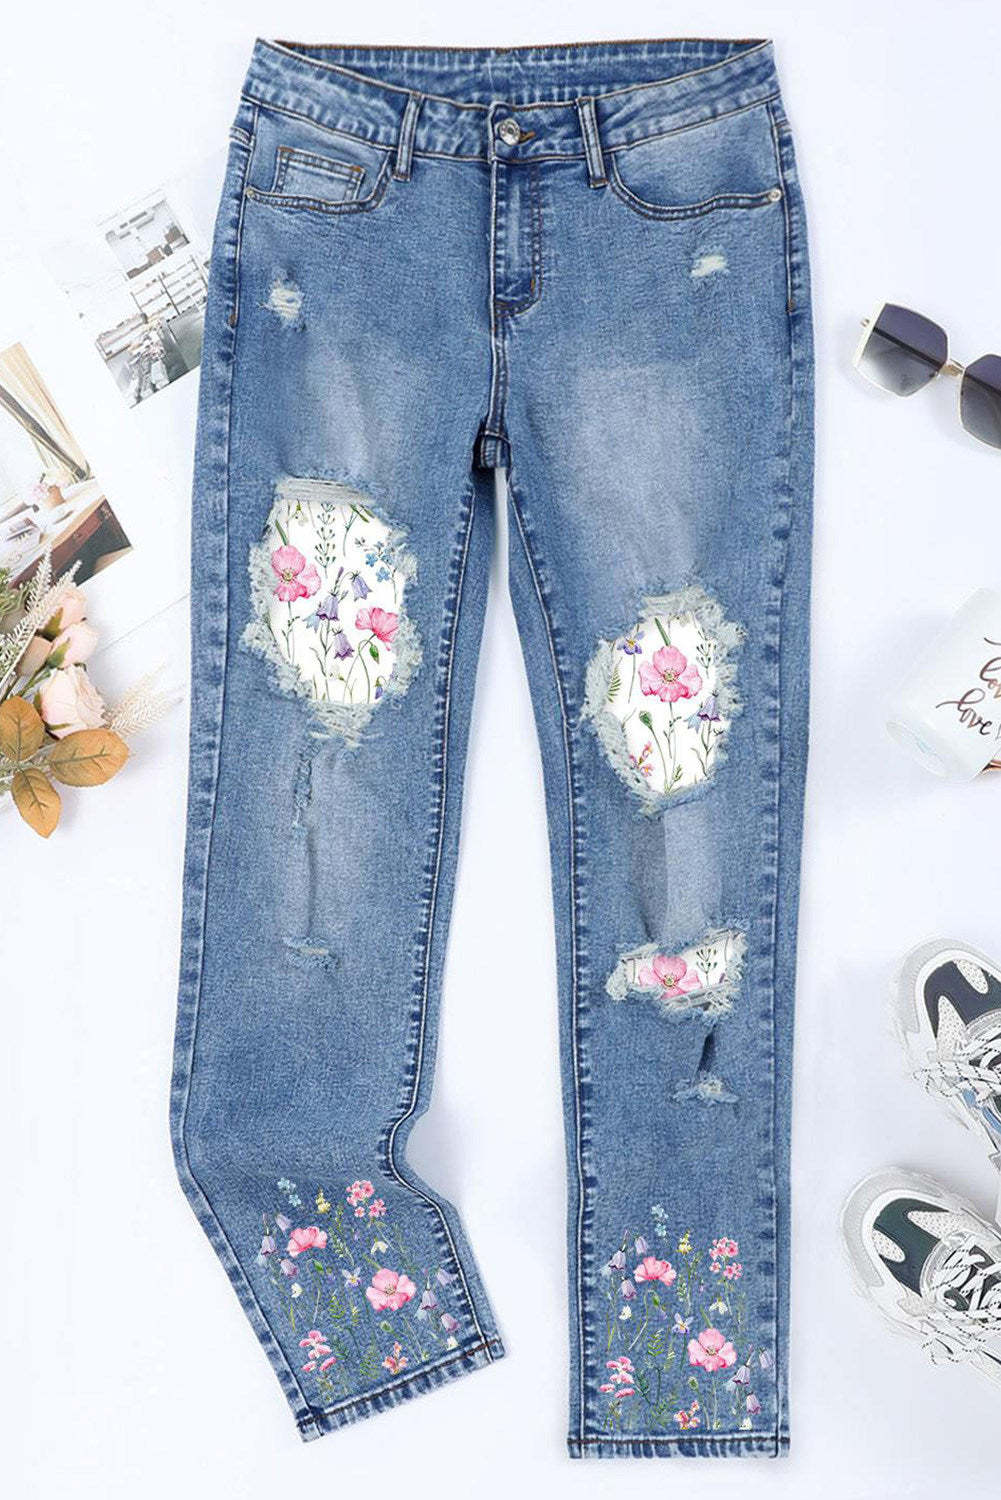 Spring Floral Graphic Shift Ripped Casual Jeans $ 46.99 - Evaless